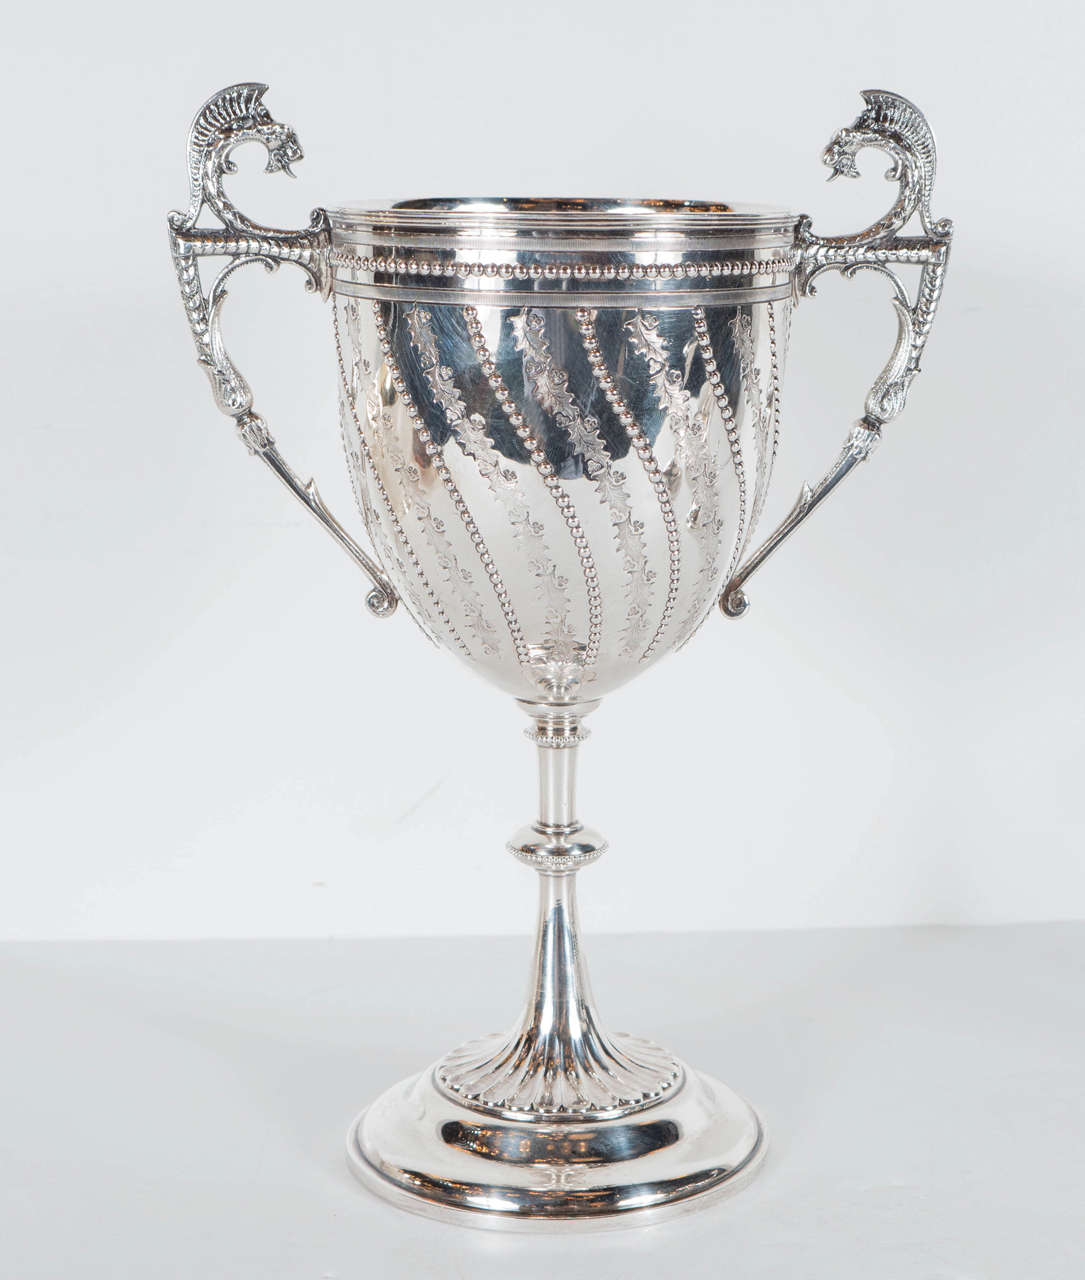 This elegant Hollywood Regency silver plated chalice features intricate floral and beaded detailing, sculptural dragon gargoyles on the handles, as well as a fluted cascading base. A great decorative item for a bookcase or display or really gorgeous